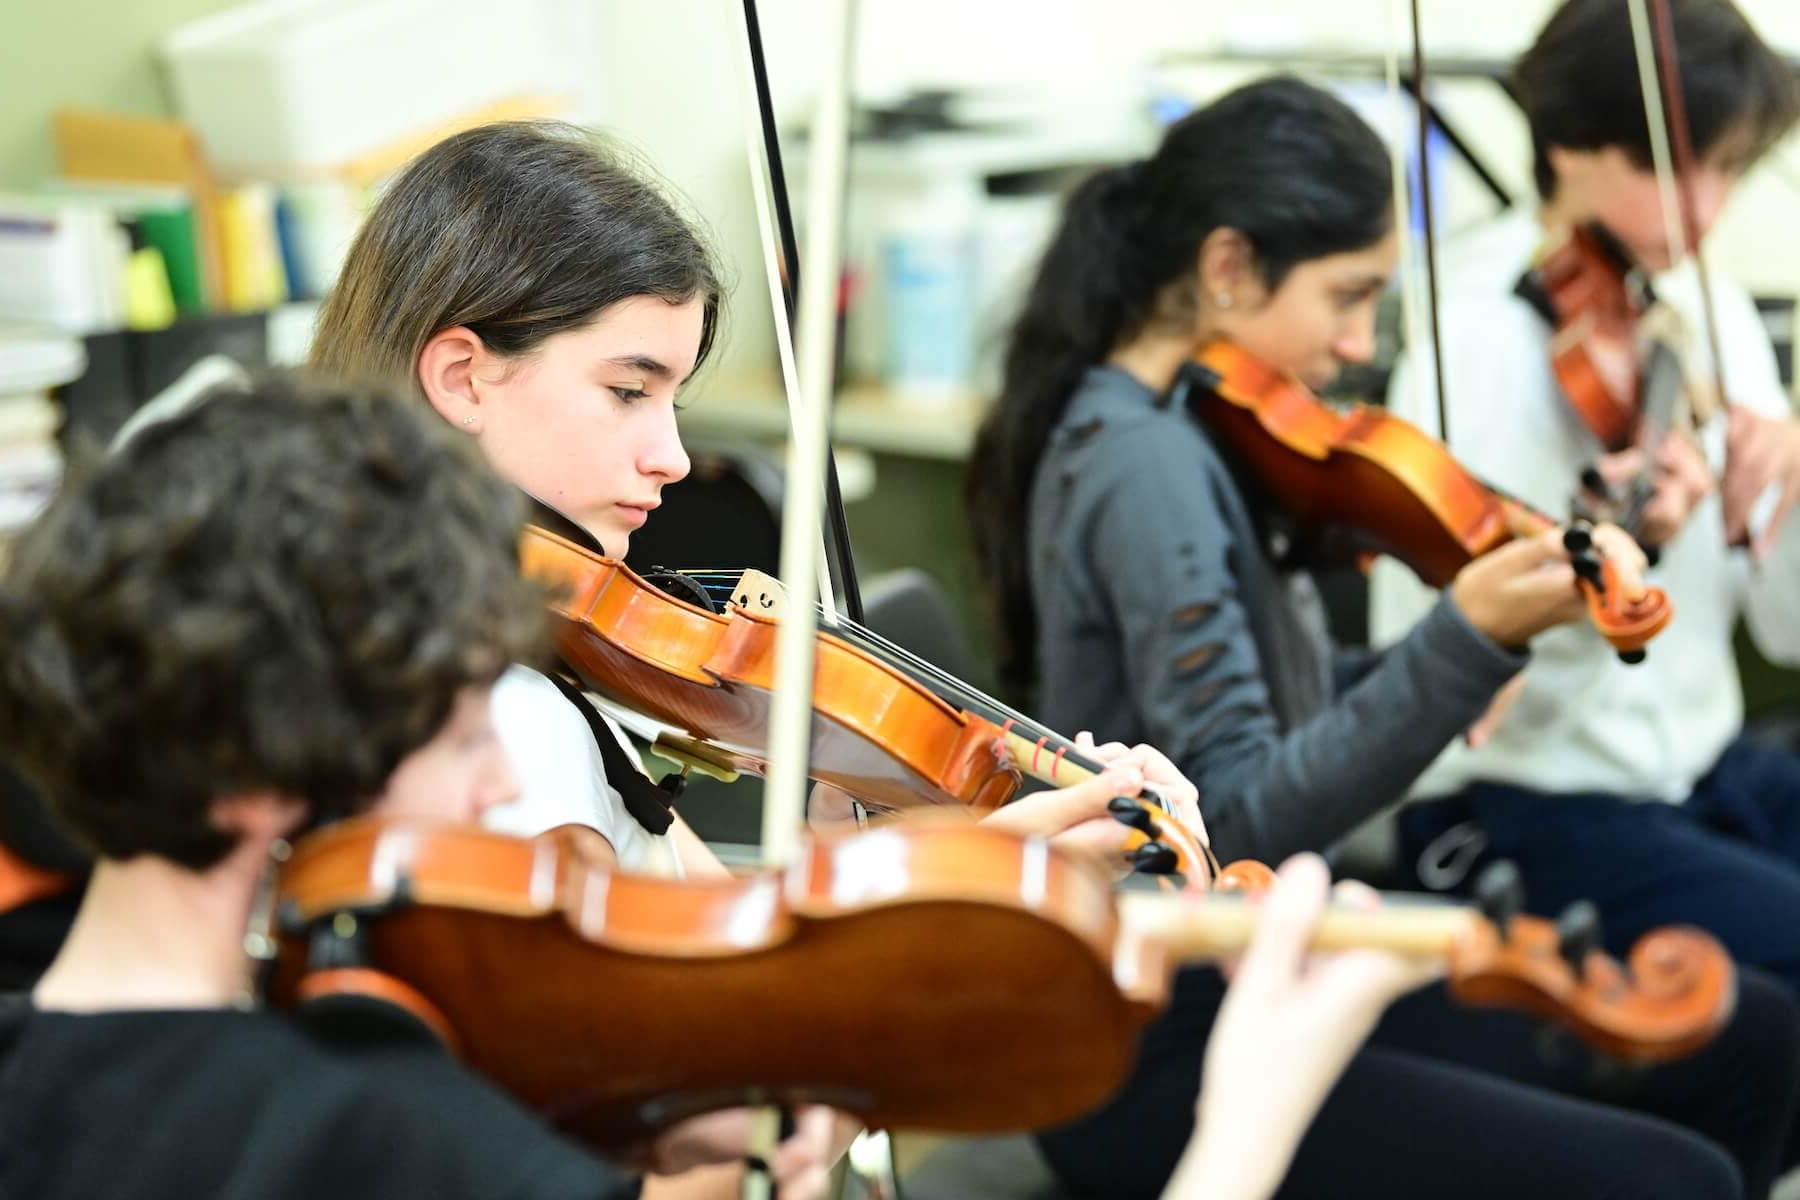 Ethical Culture Fieldston School students practicing on violins in strings class